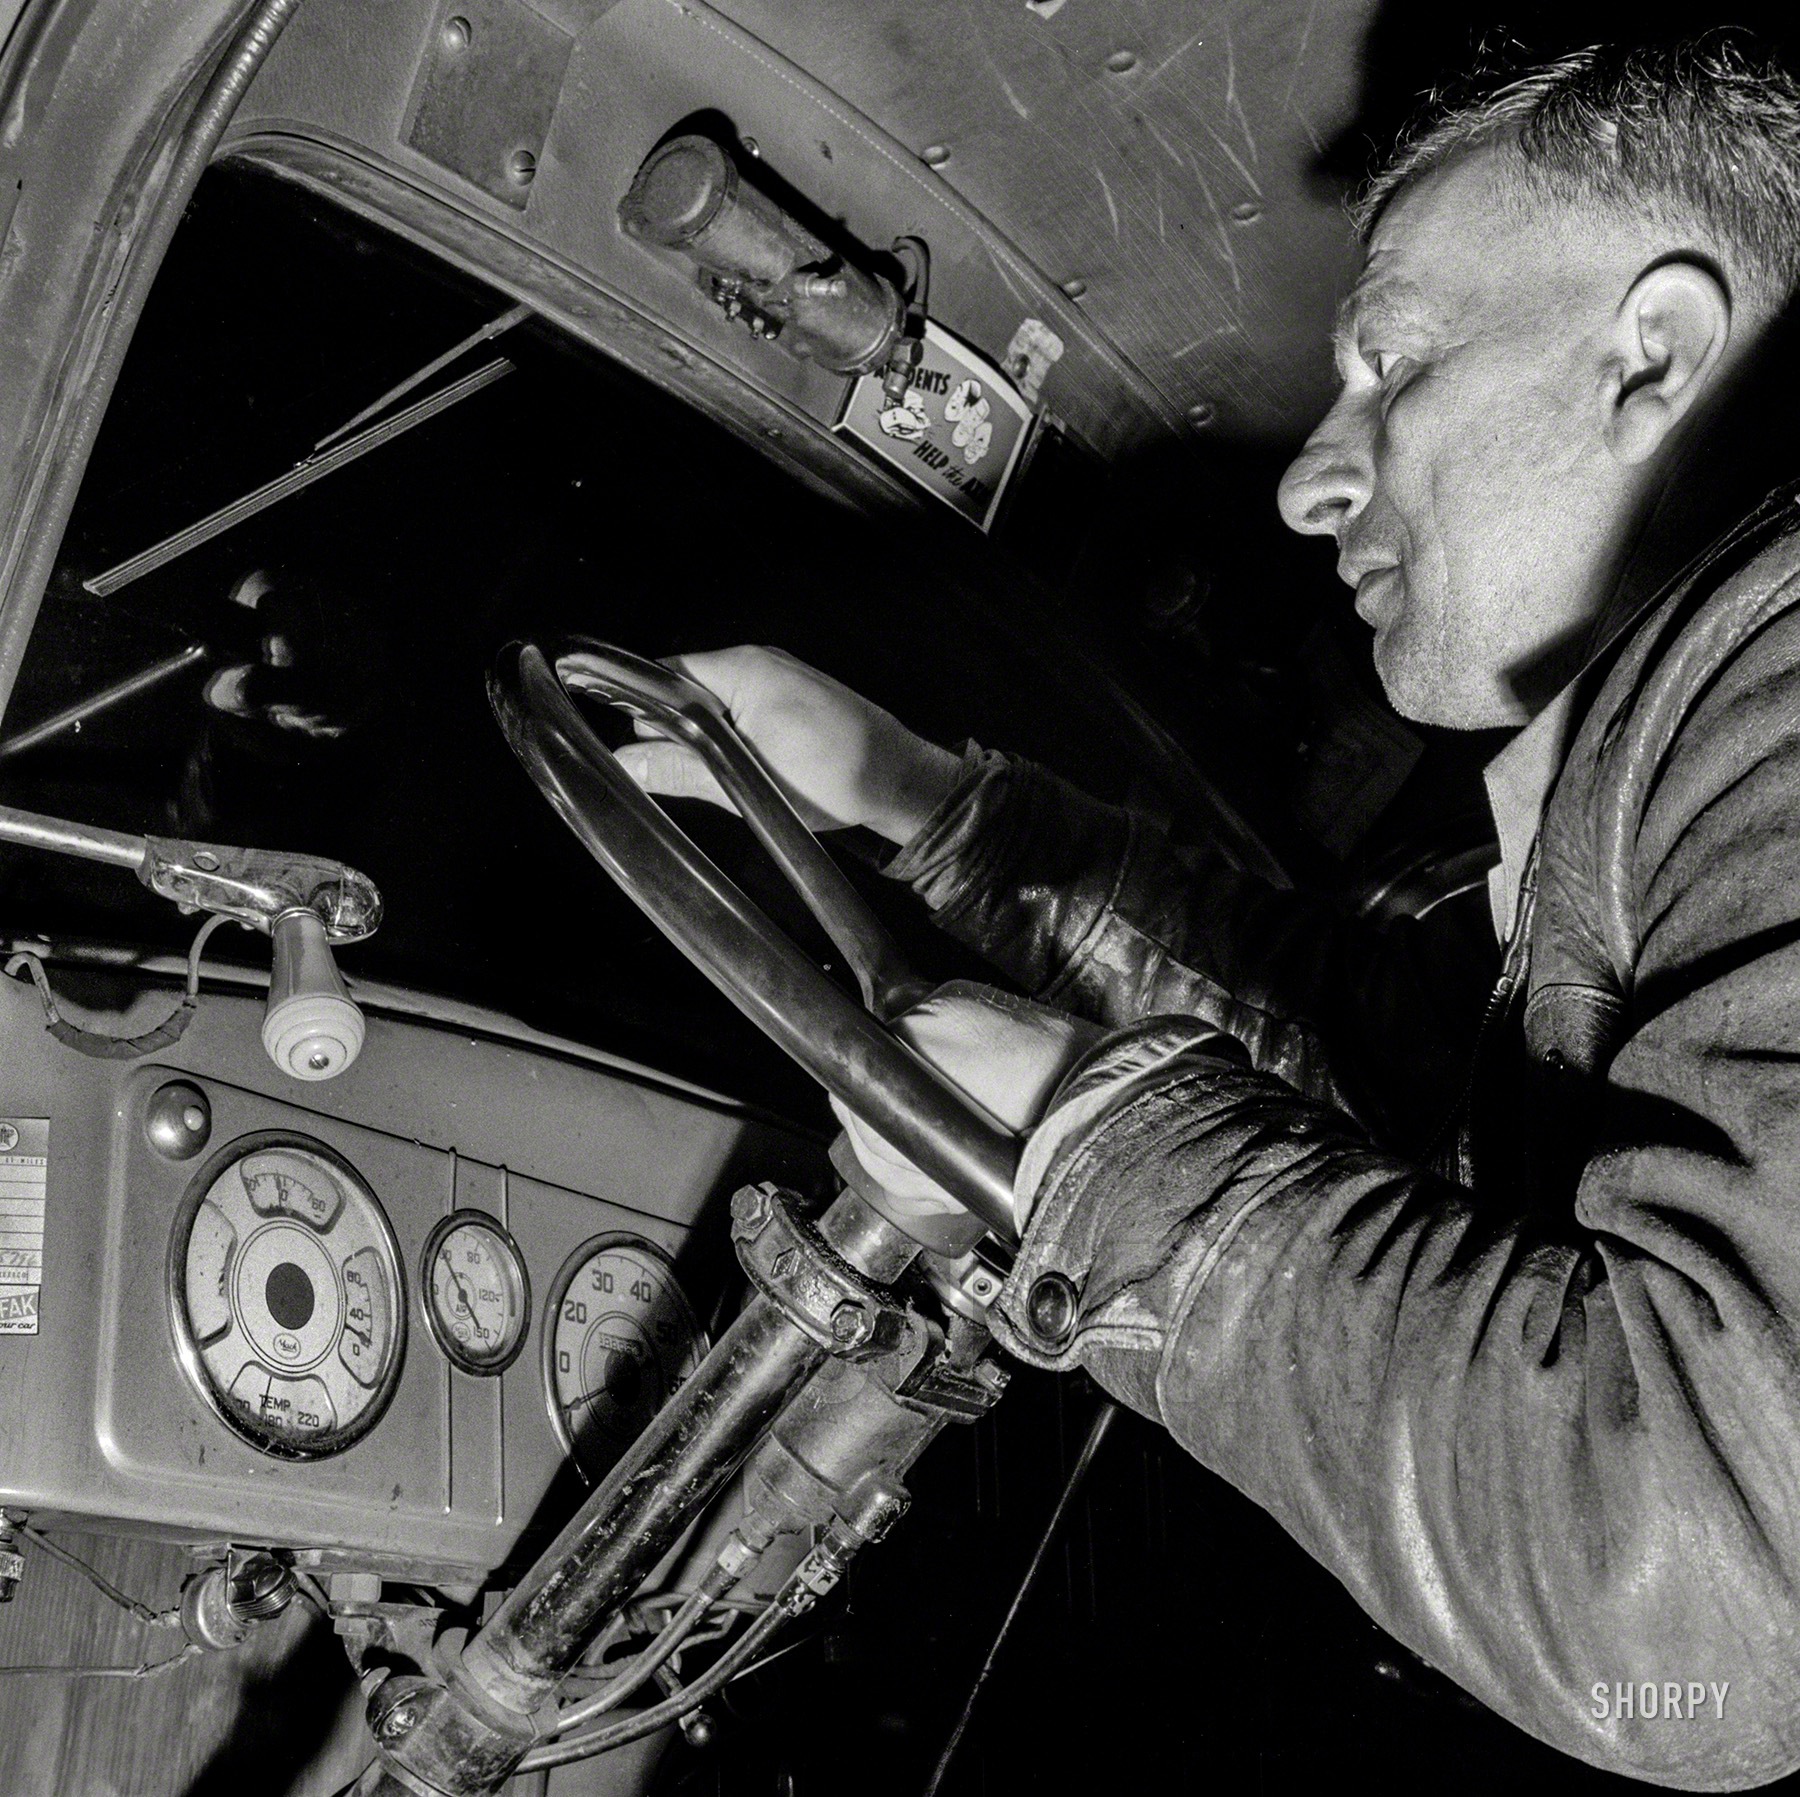 March 1943. Pearlington, Mississippi (vicinity). "James Hall, truck driver, en route to New Orleans on U.S. Highway 90." Header placard: "Accidents Help the Axis." Photo by John Vachon for the Office of War Information. View full size.